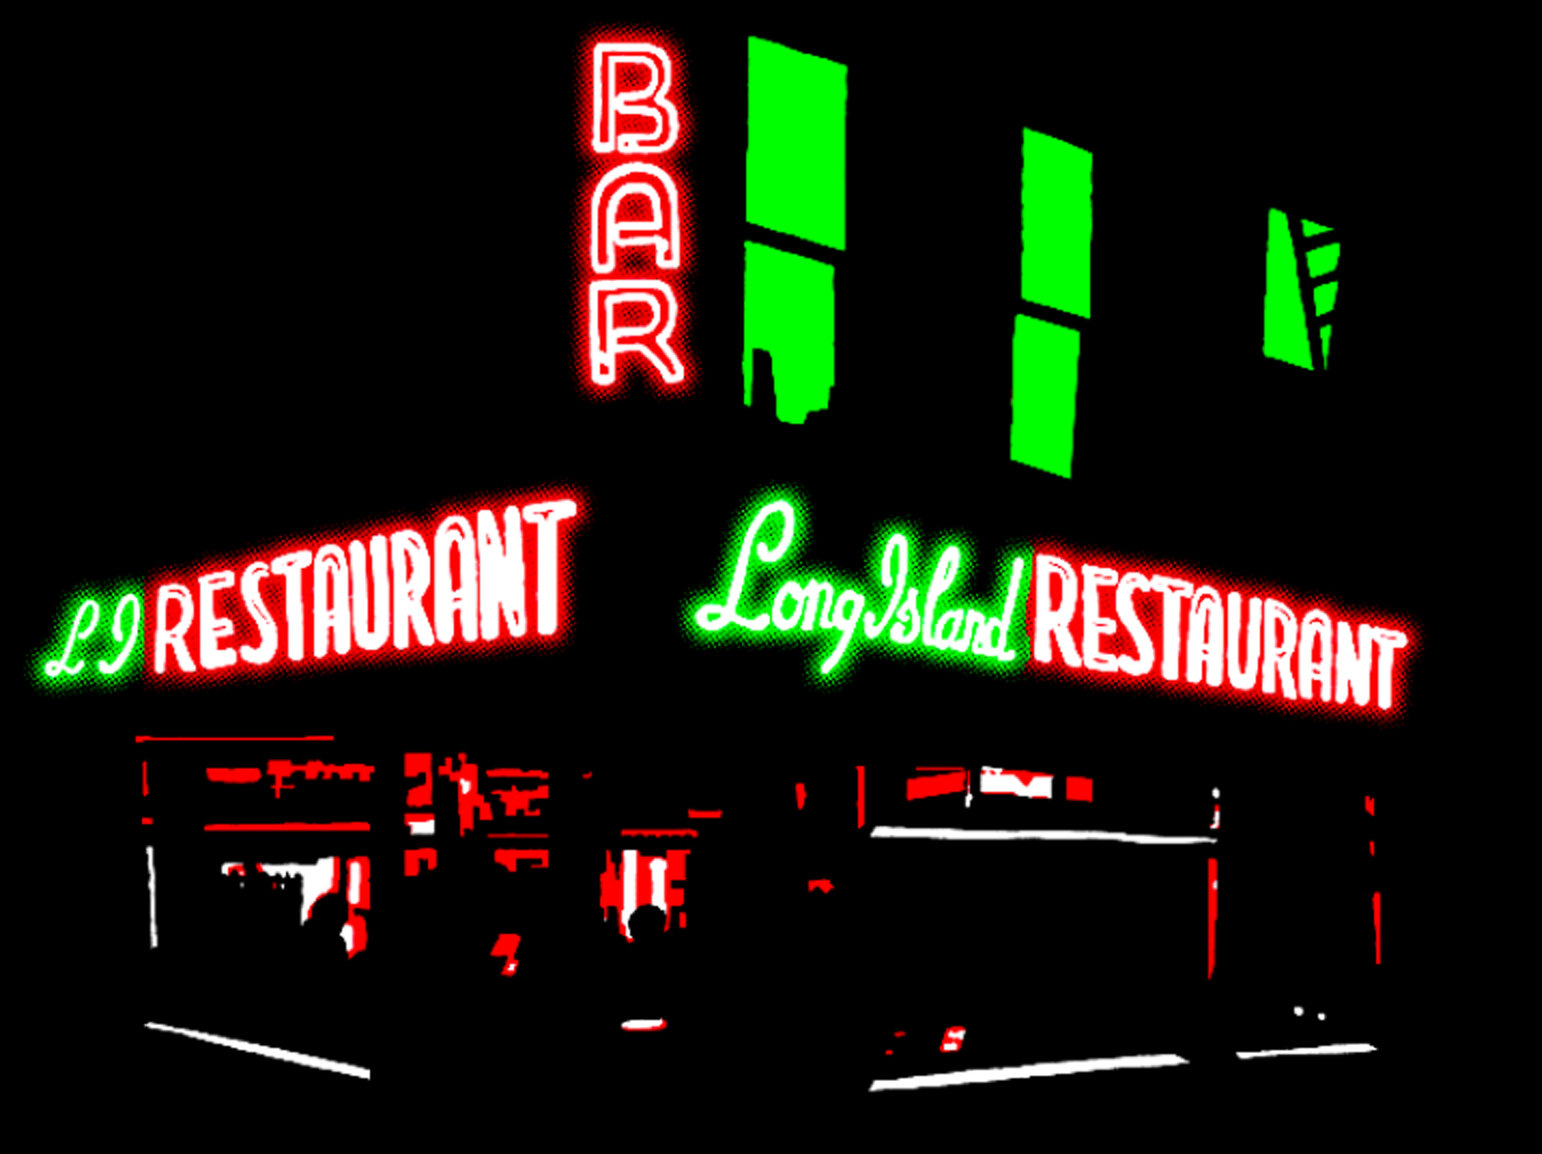 My artist husband, John Tebeau, did this artwork celebrating one of our favorite bars, the Long Island.